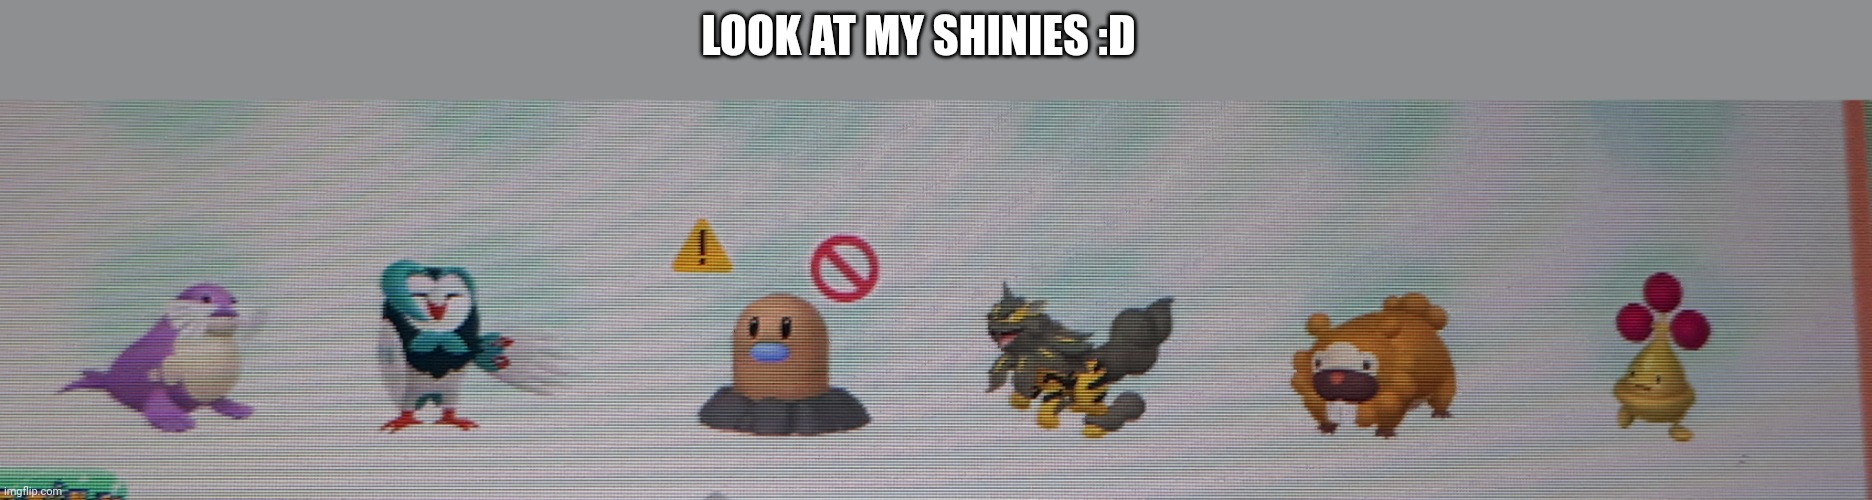 :D | LOOK AT MY SHINIES :D | image tagged in shiny | made w/ Imgflip meme maker